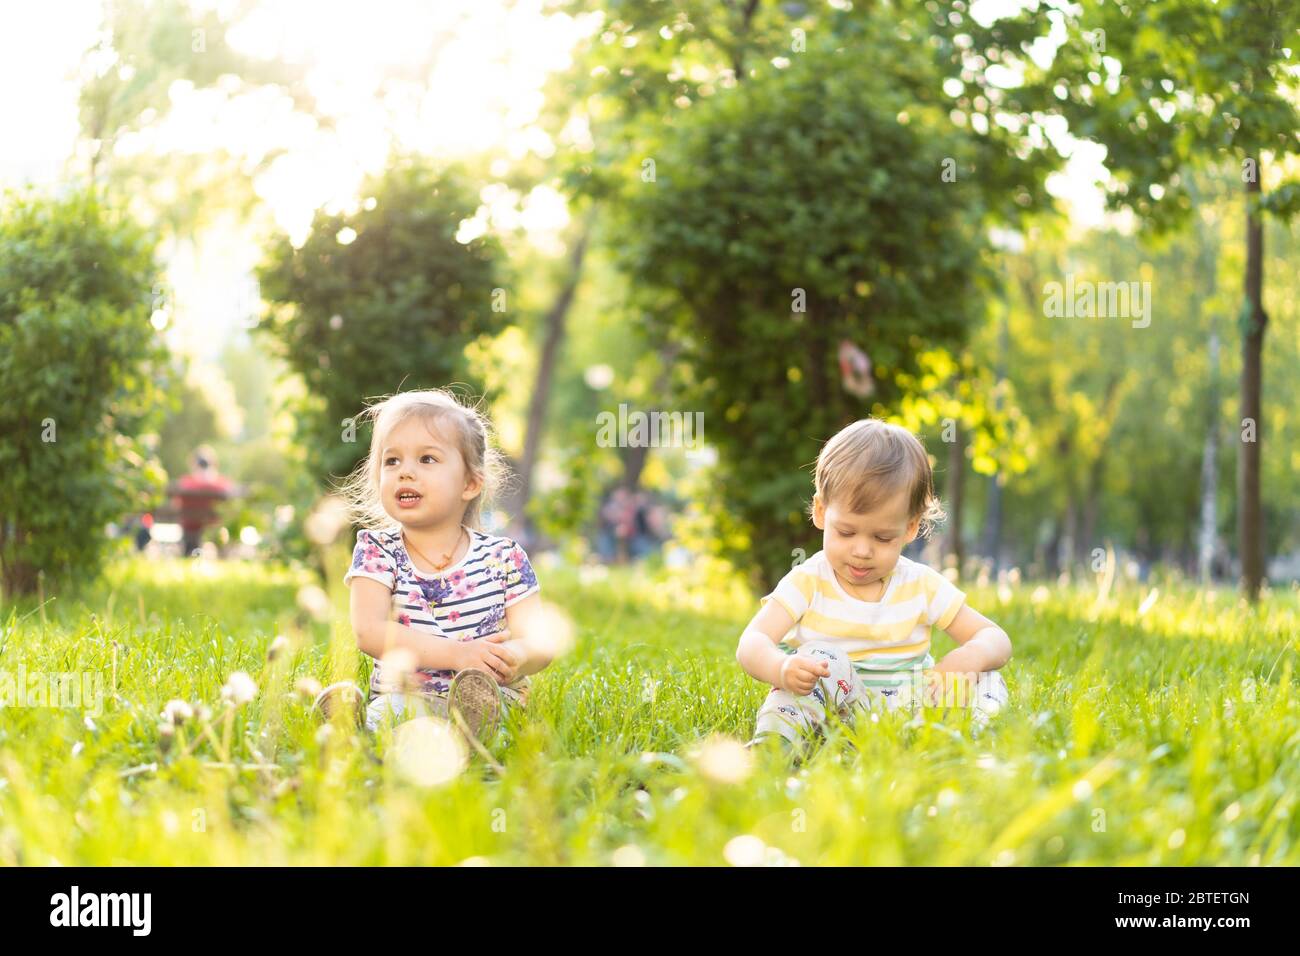 Boy Girl Twins Babies High Resolution Stock Photography And Images Alamy